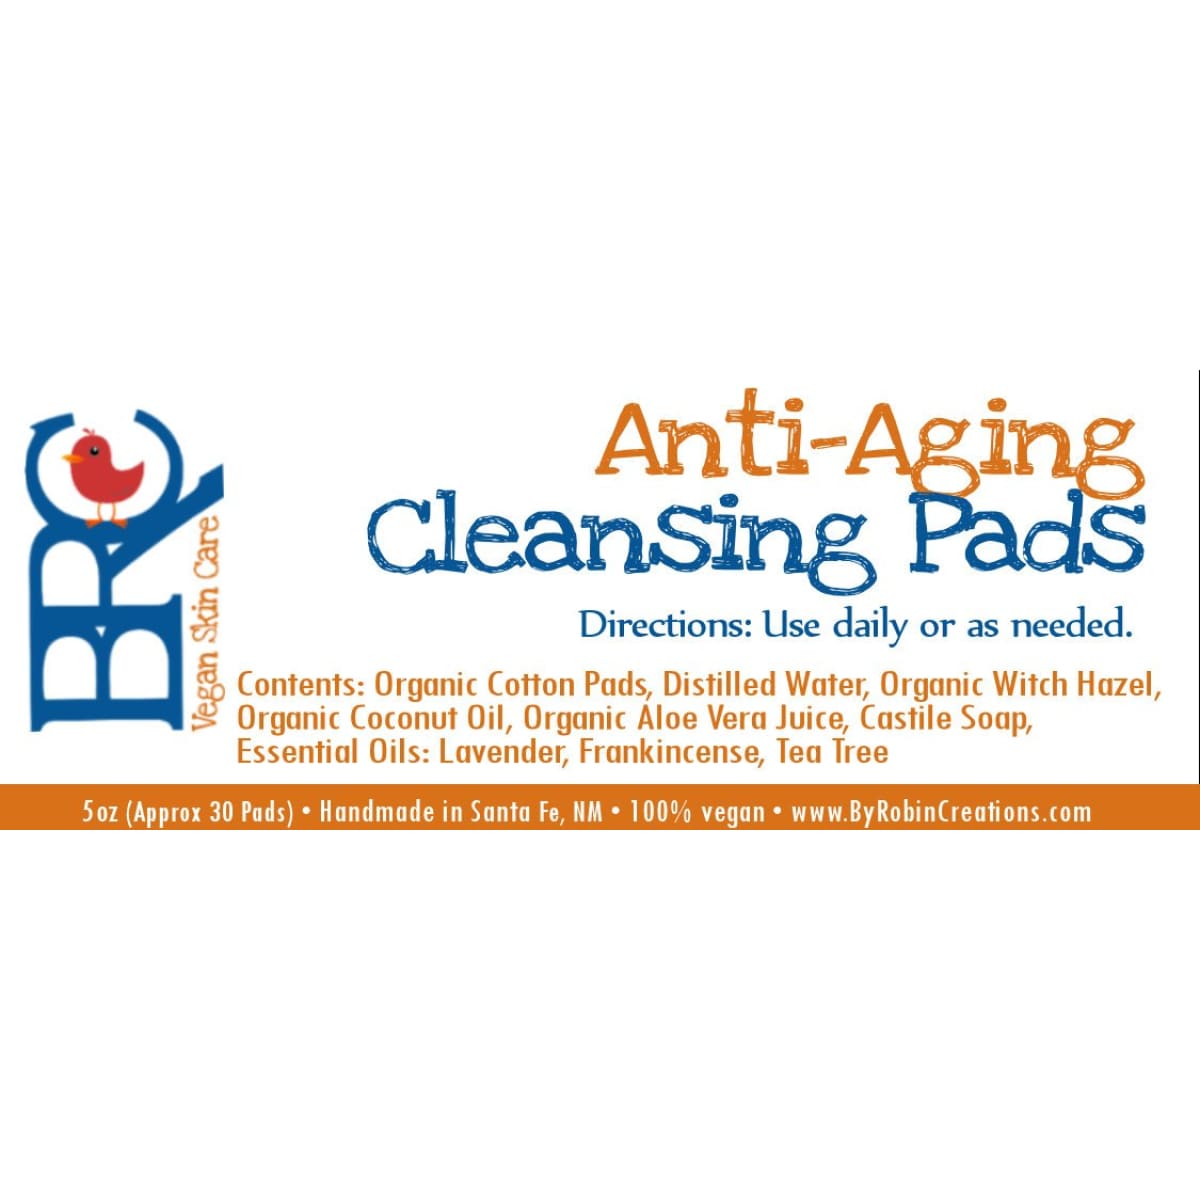 Radiance Anti-Aging Face Cleansing Pads | By Robin Creations 